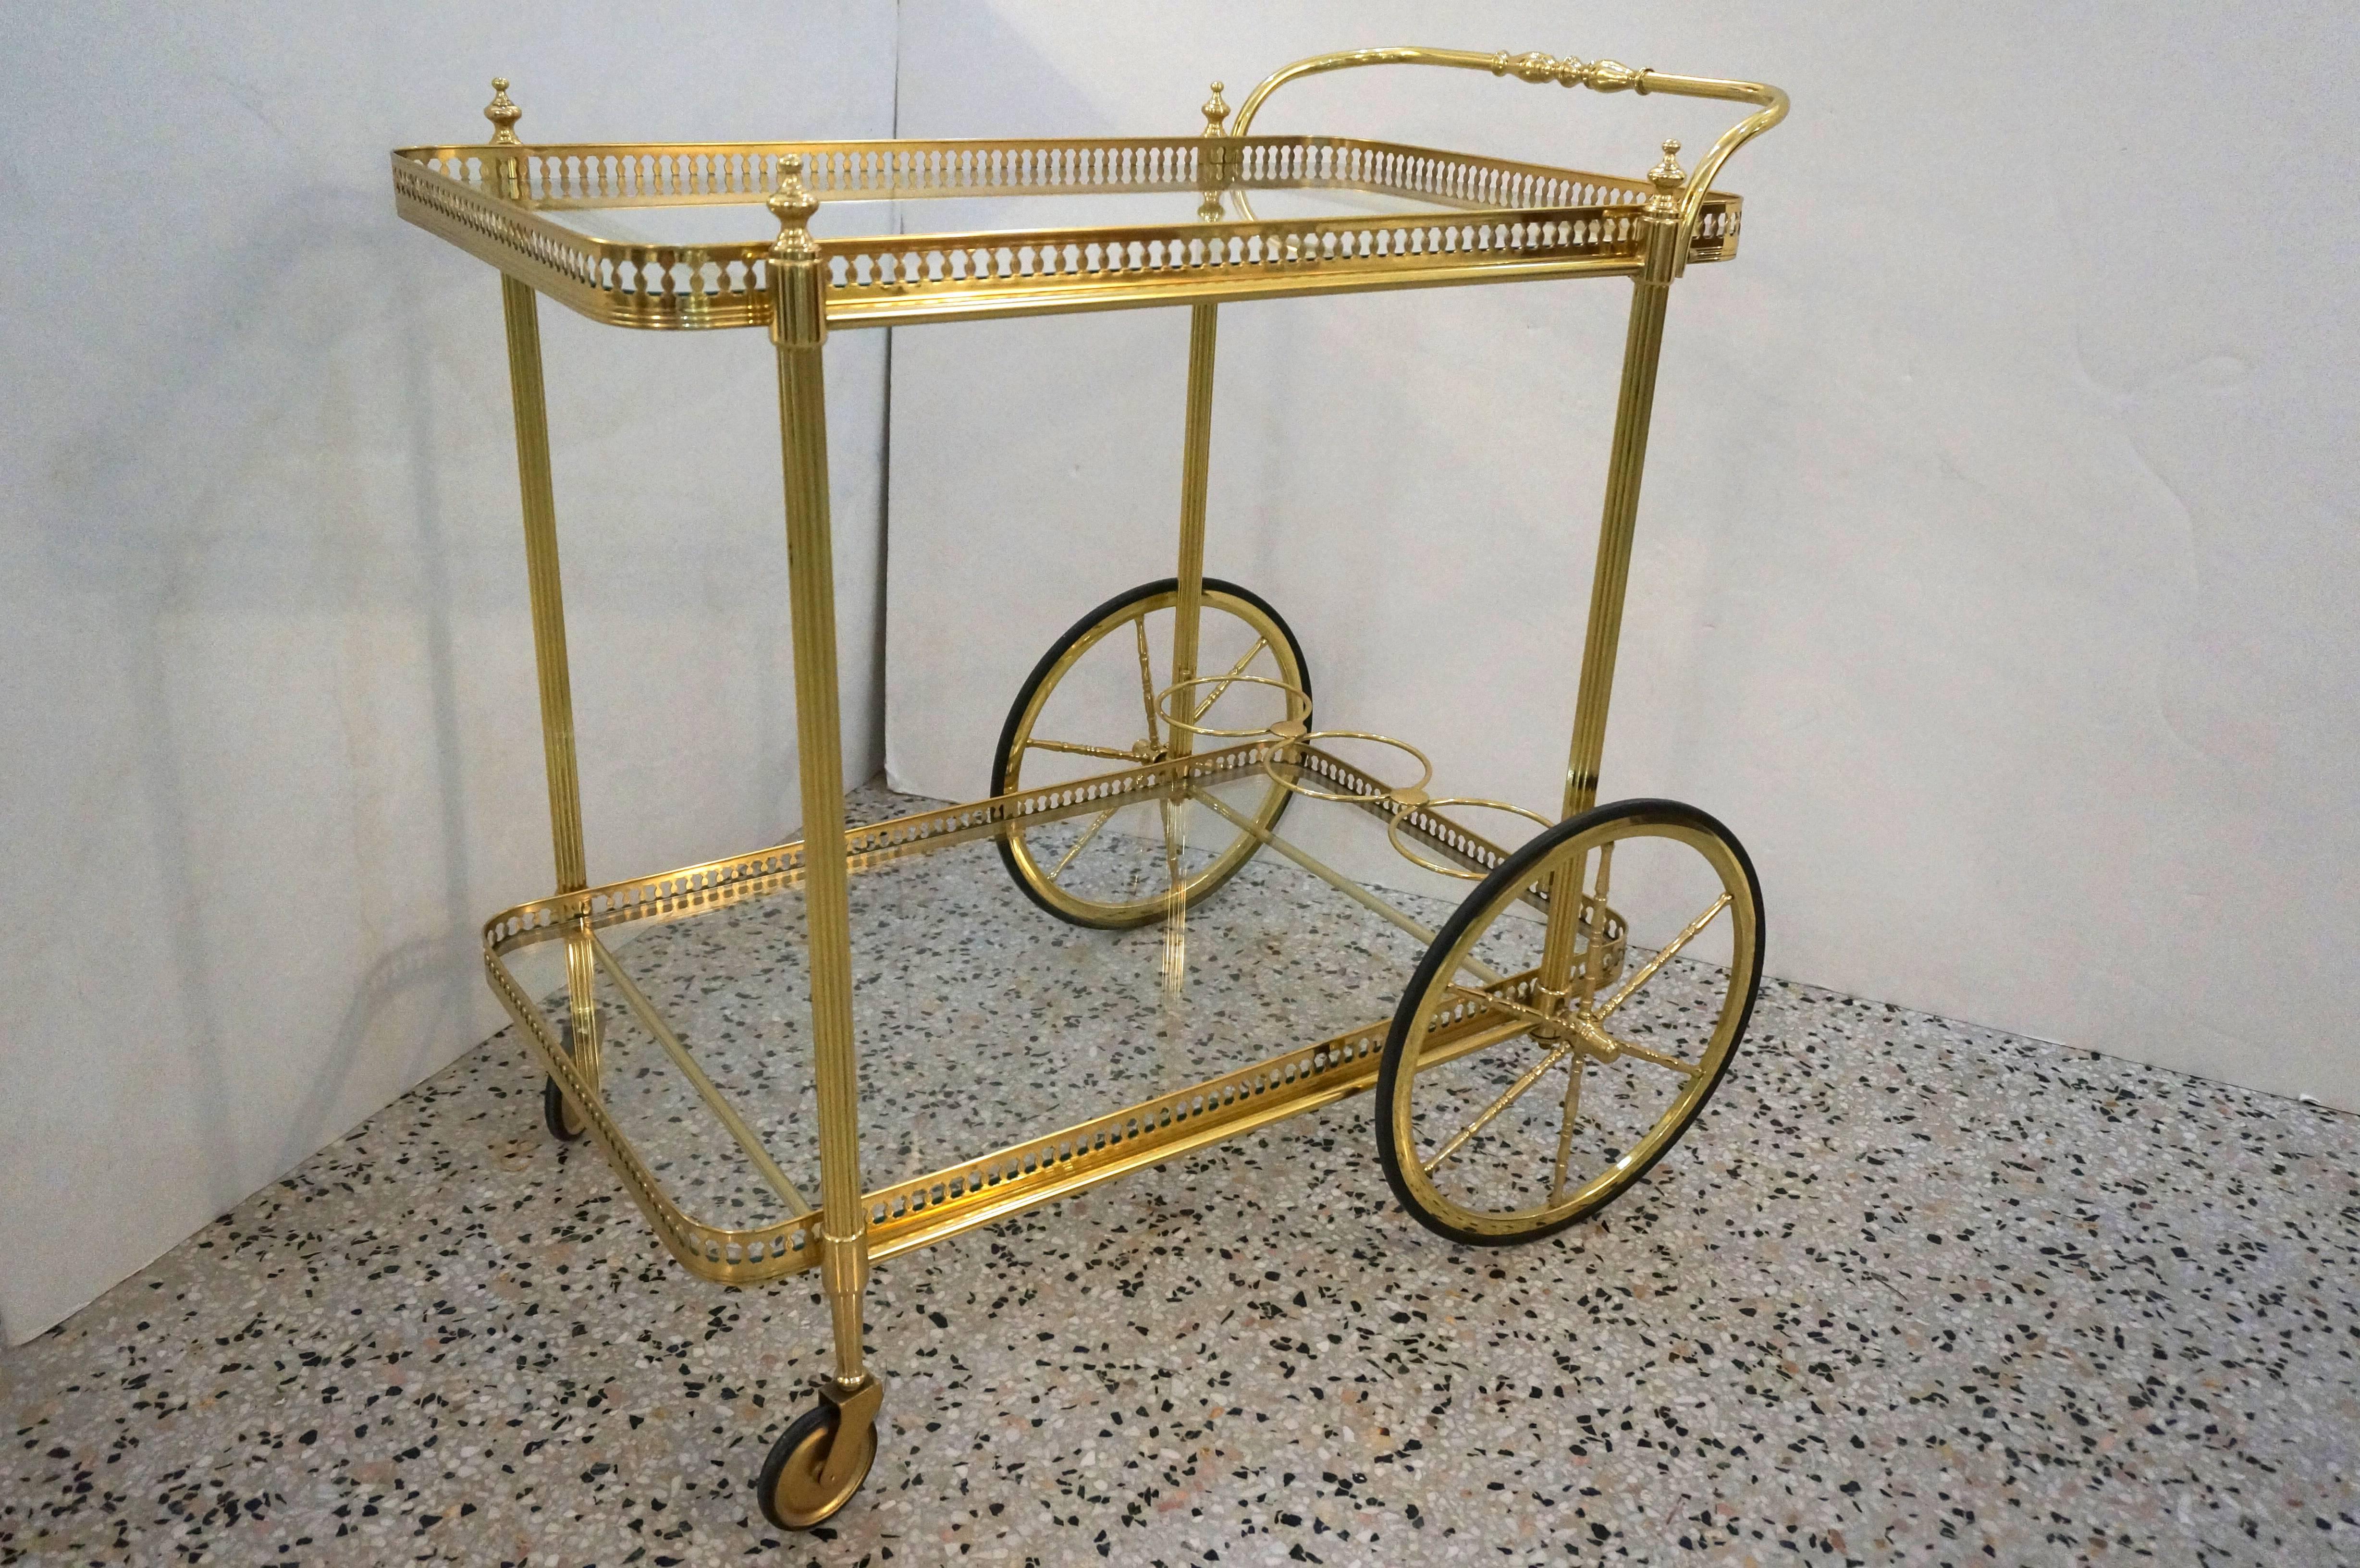 This stylish Maison Jansen style bar cart will make the perfect piece for entertaining with its two tiers which will accommodate your barware and liquors.